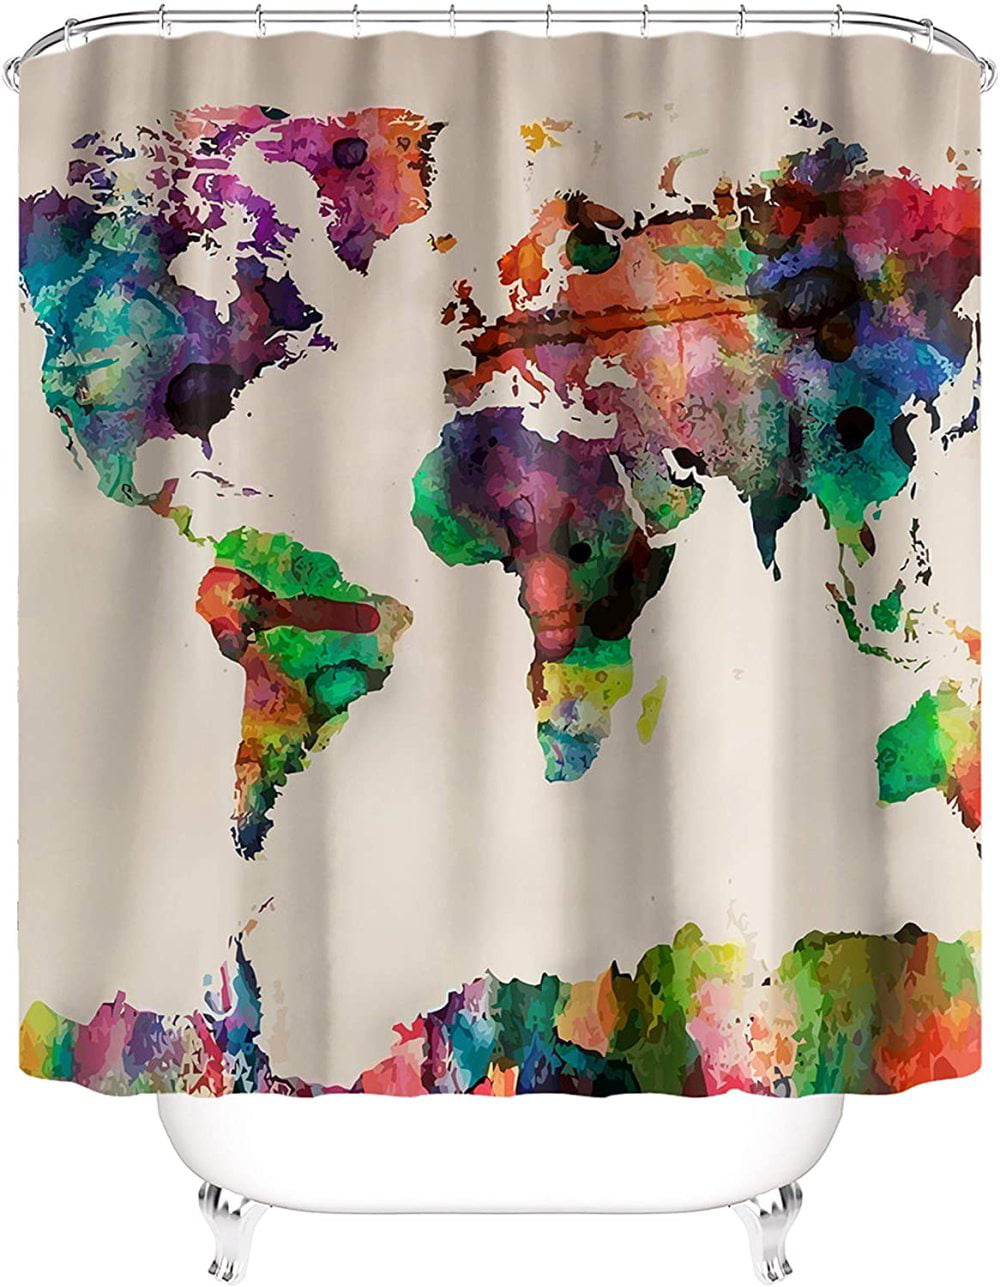 72x72" Old World Map Polyester Fabric Waterproof Bathroom Shower Curtain 12Hooks 